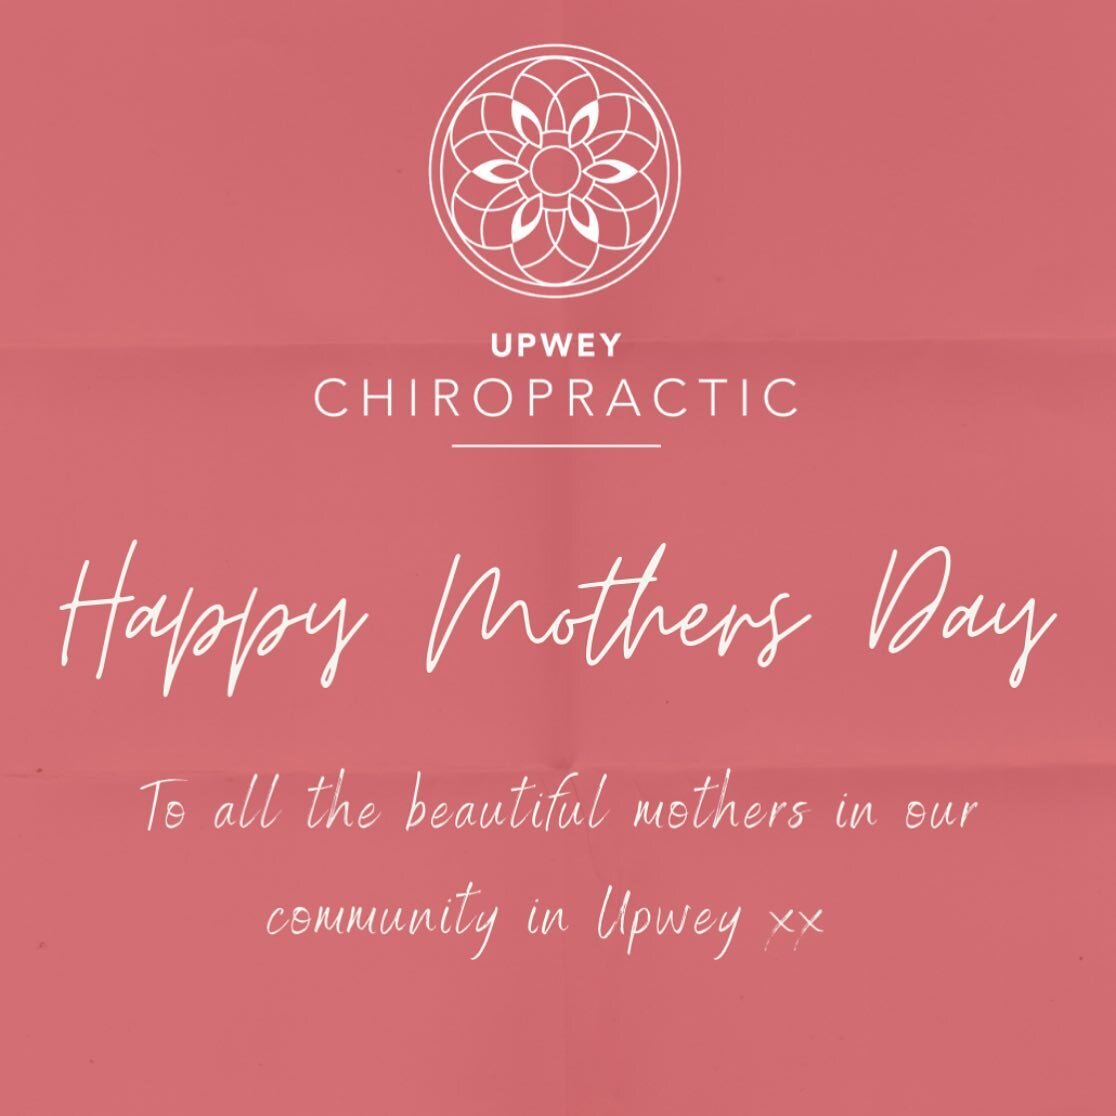 Happy Mothers Day to all the beautiful mothers in our community. We appreciate your continued love and support you have shown us at Upwey Chiropractic &hearts;️&hearts;️&hearts;️